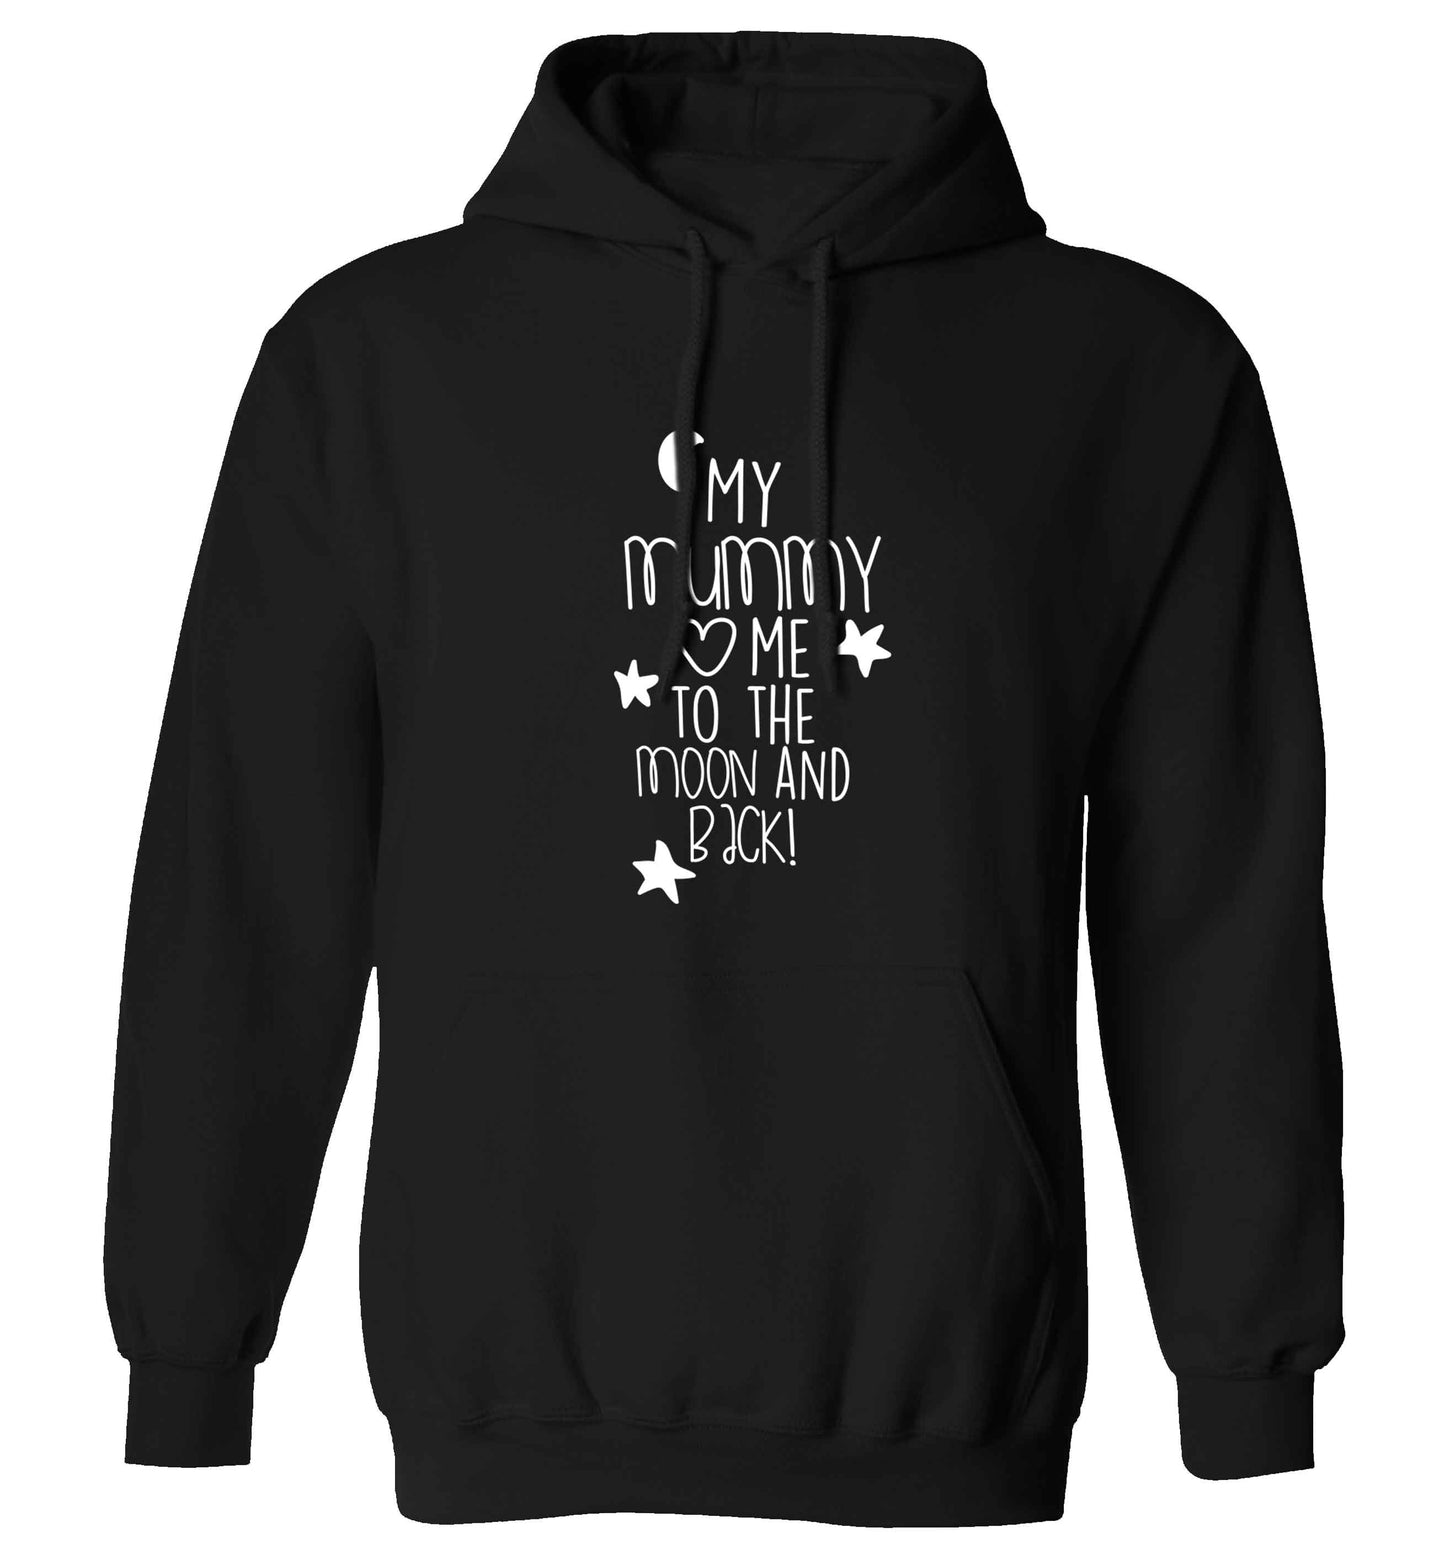 My mum loves me to the moon and back adults unisex black hoodie 2XL